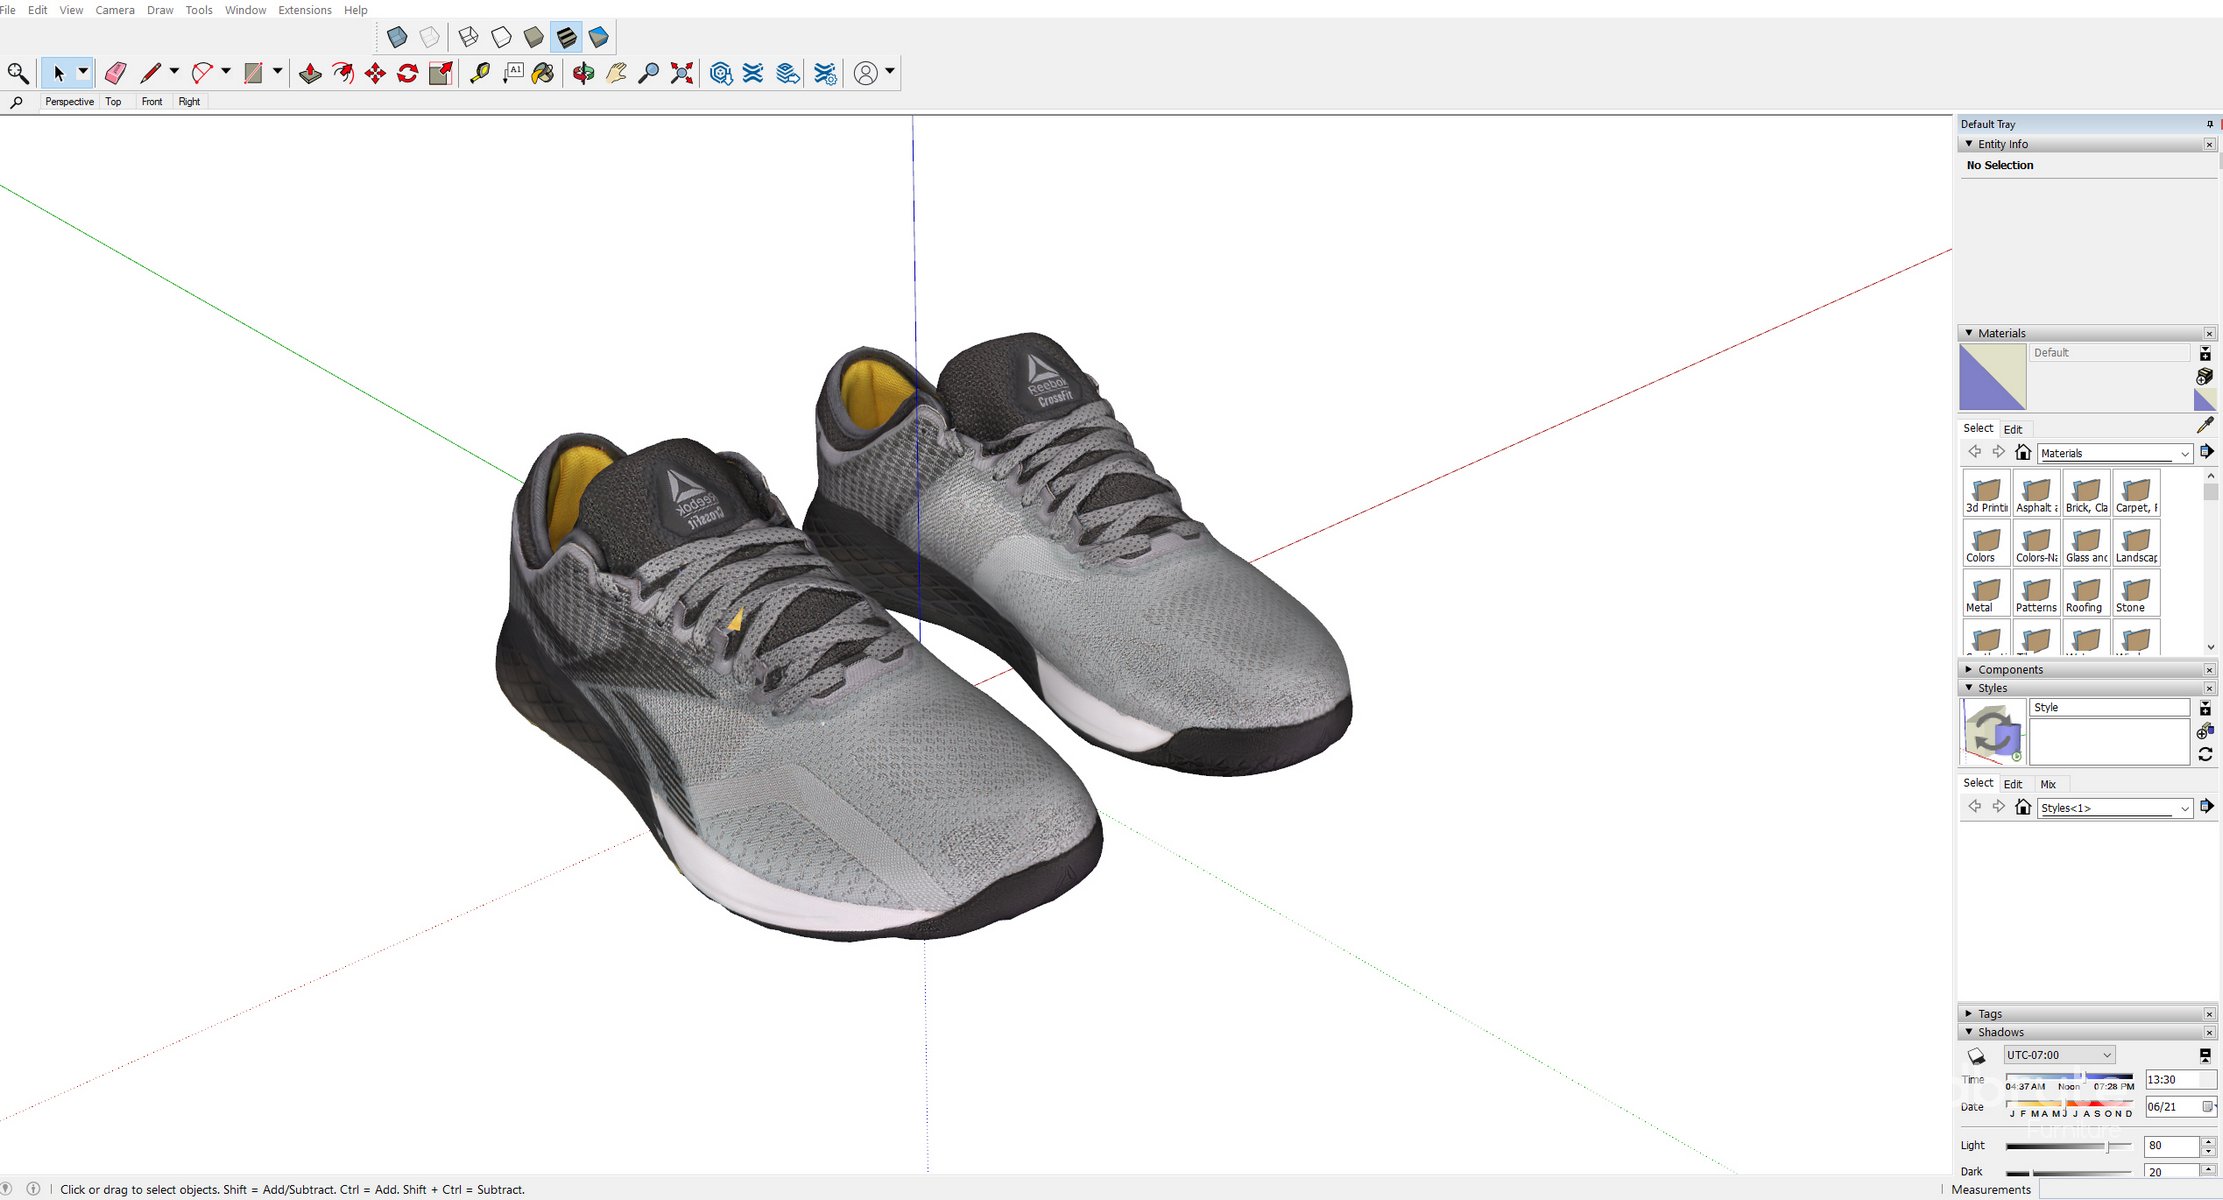 Reebok Crossfit Shoes - 3dbrute : 3dmodel furniture and decor